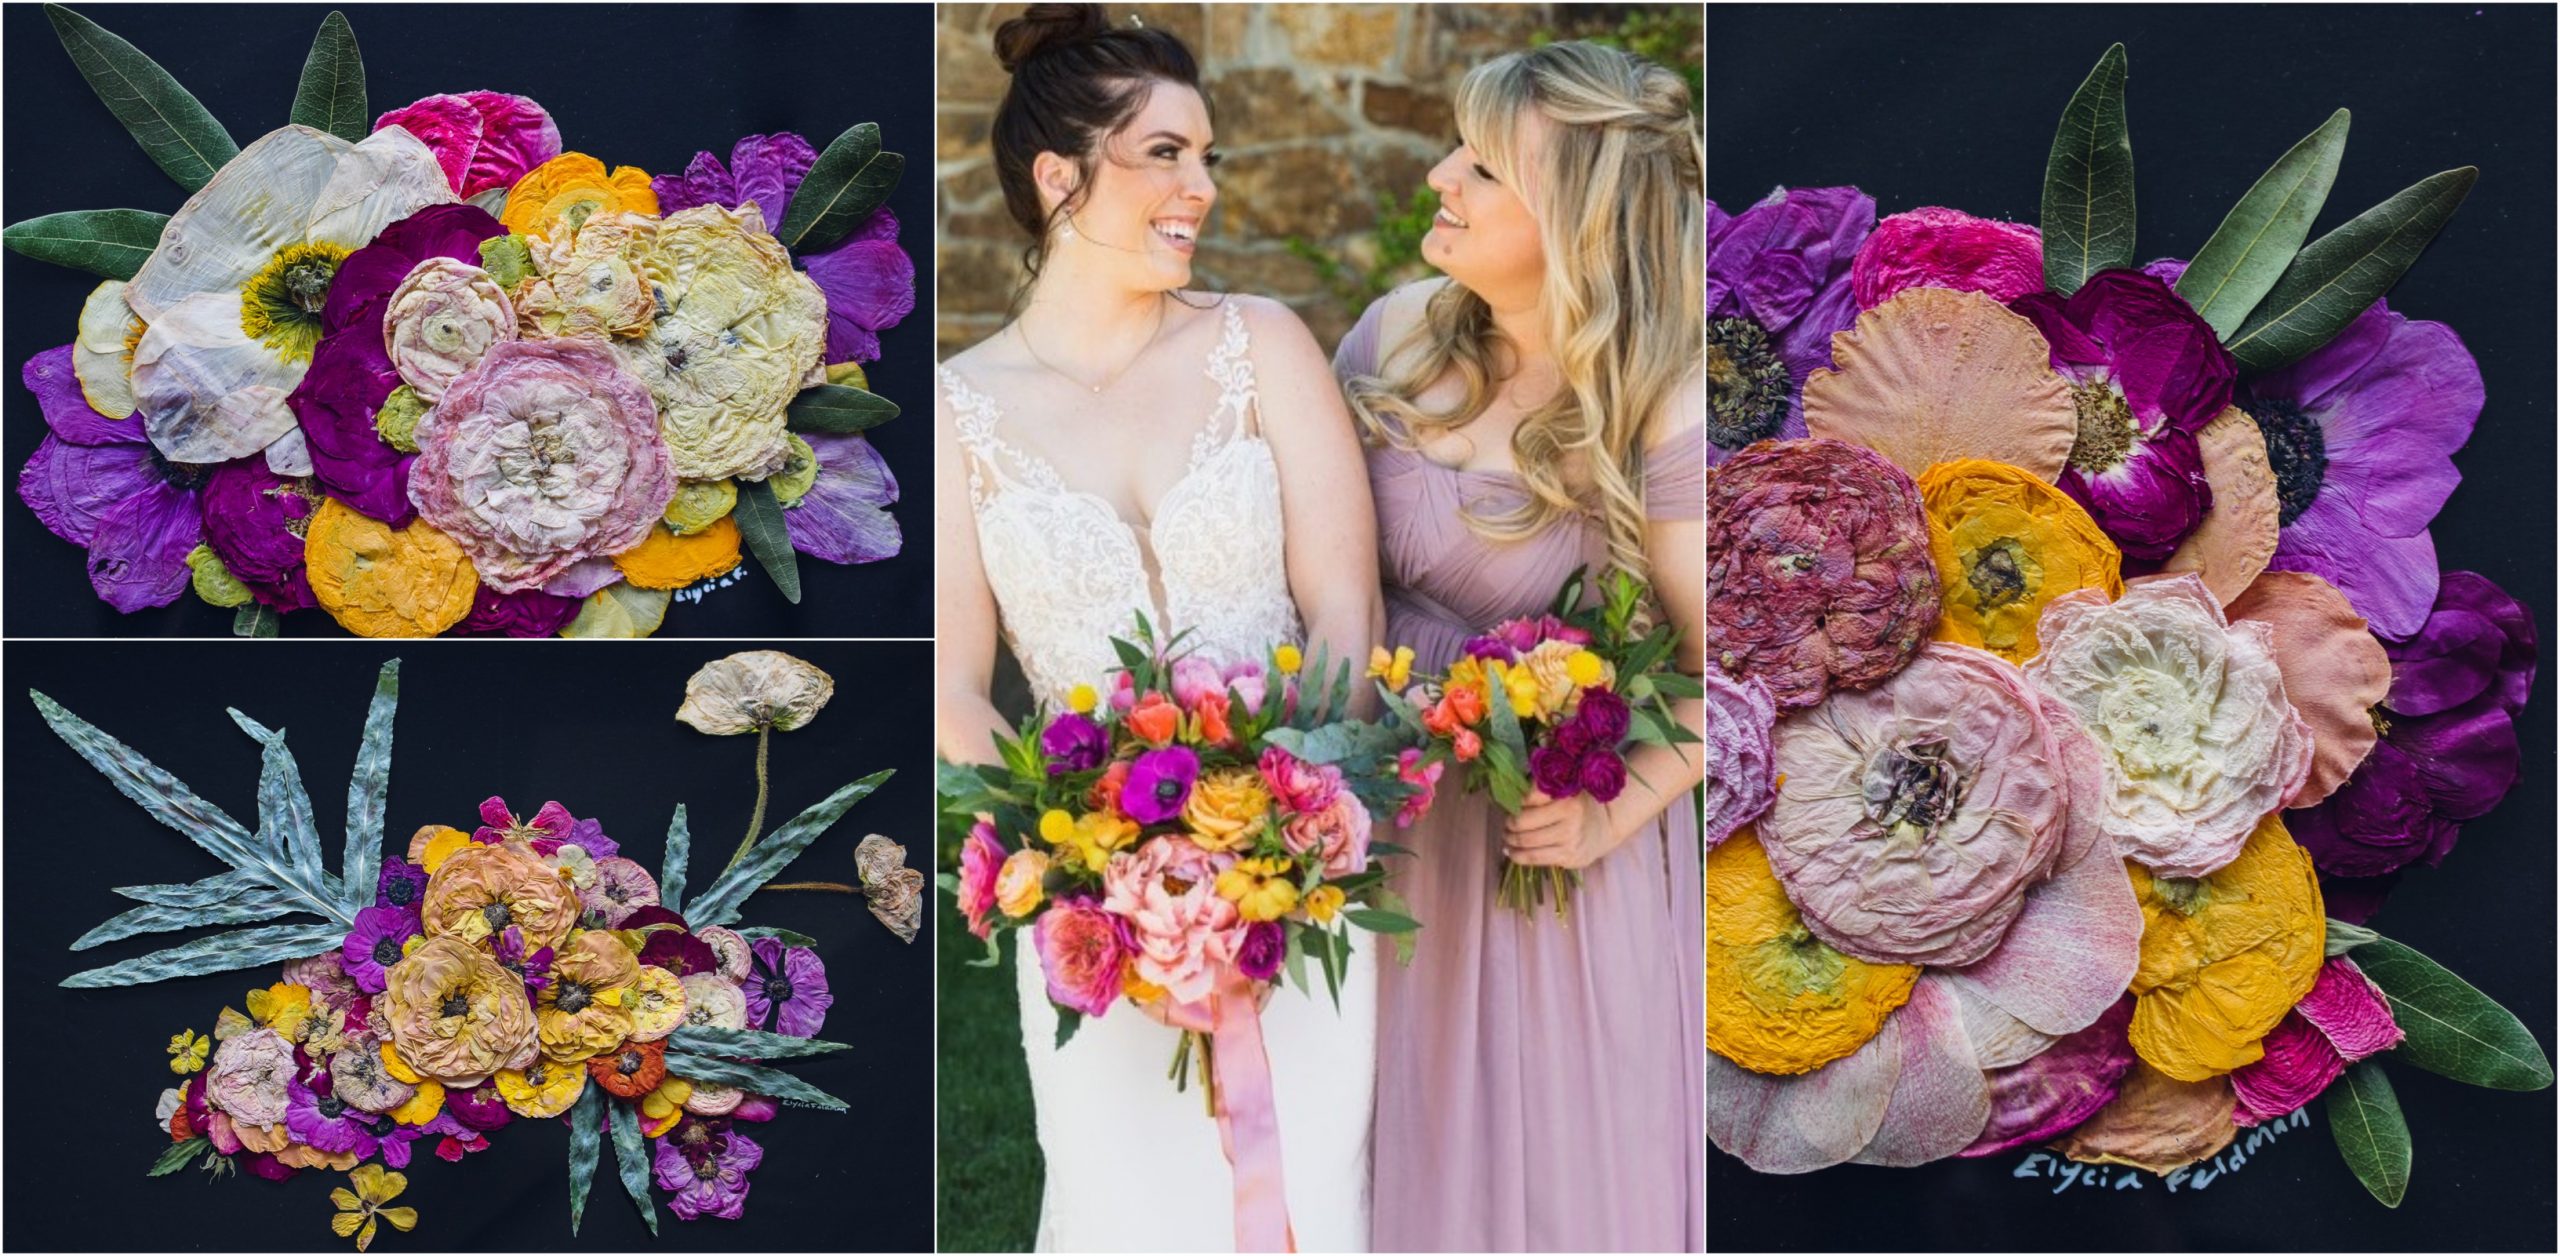 bride and bridesmaid bouquets transformed into pressed flower preservation art